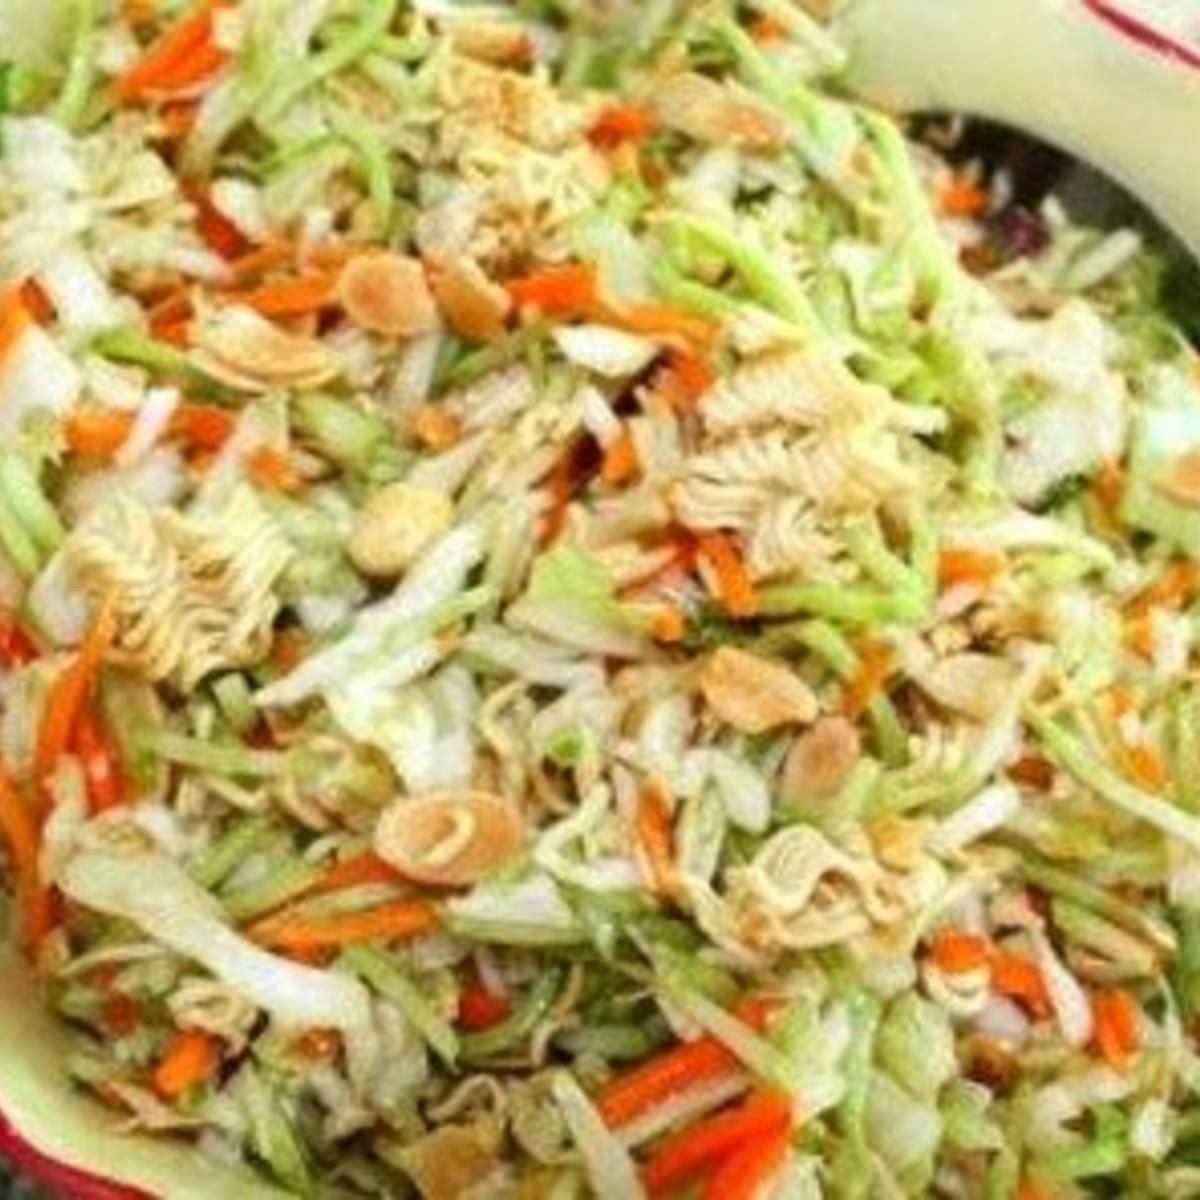 Asian cabbage salad with ramen